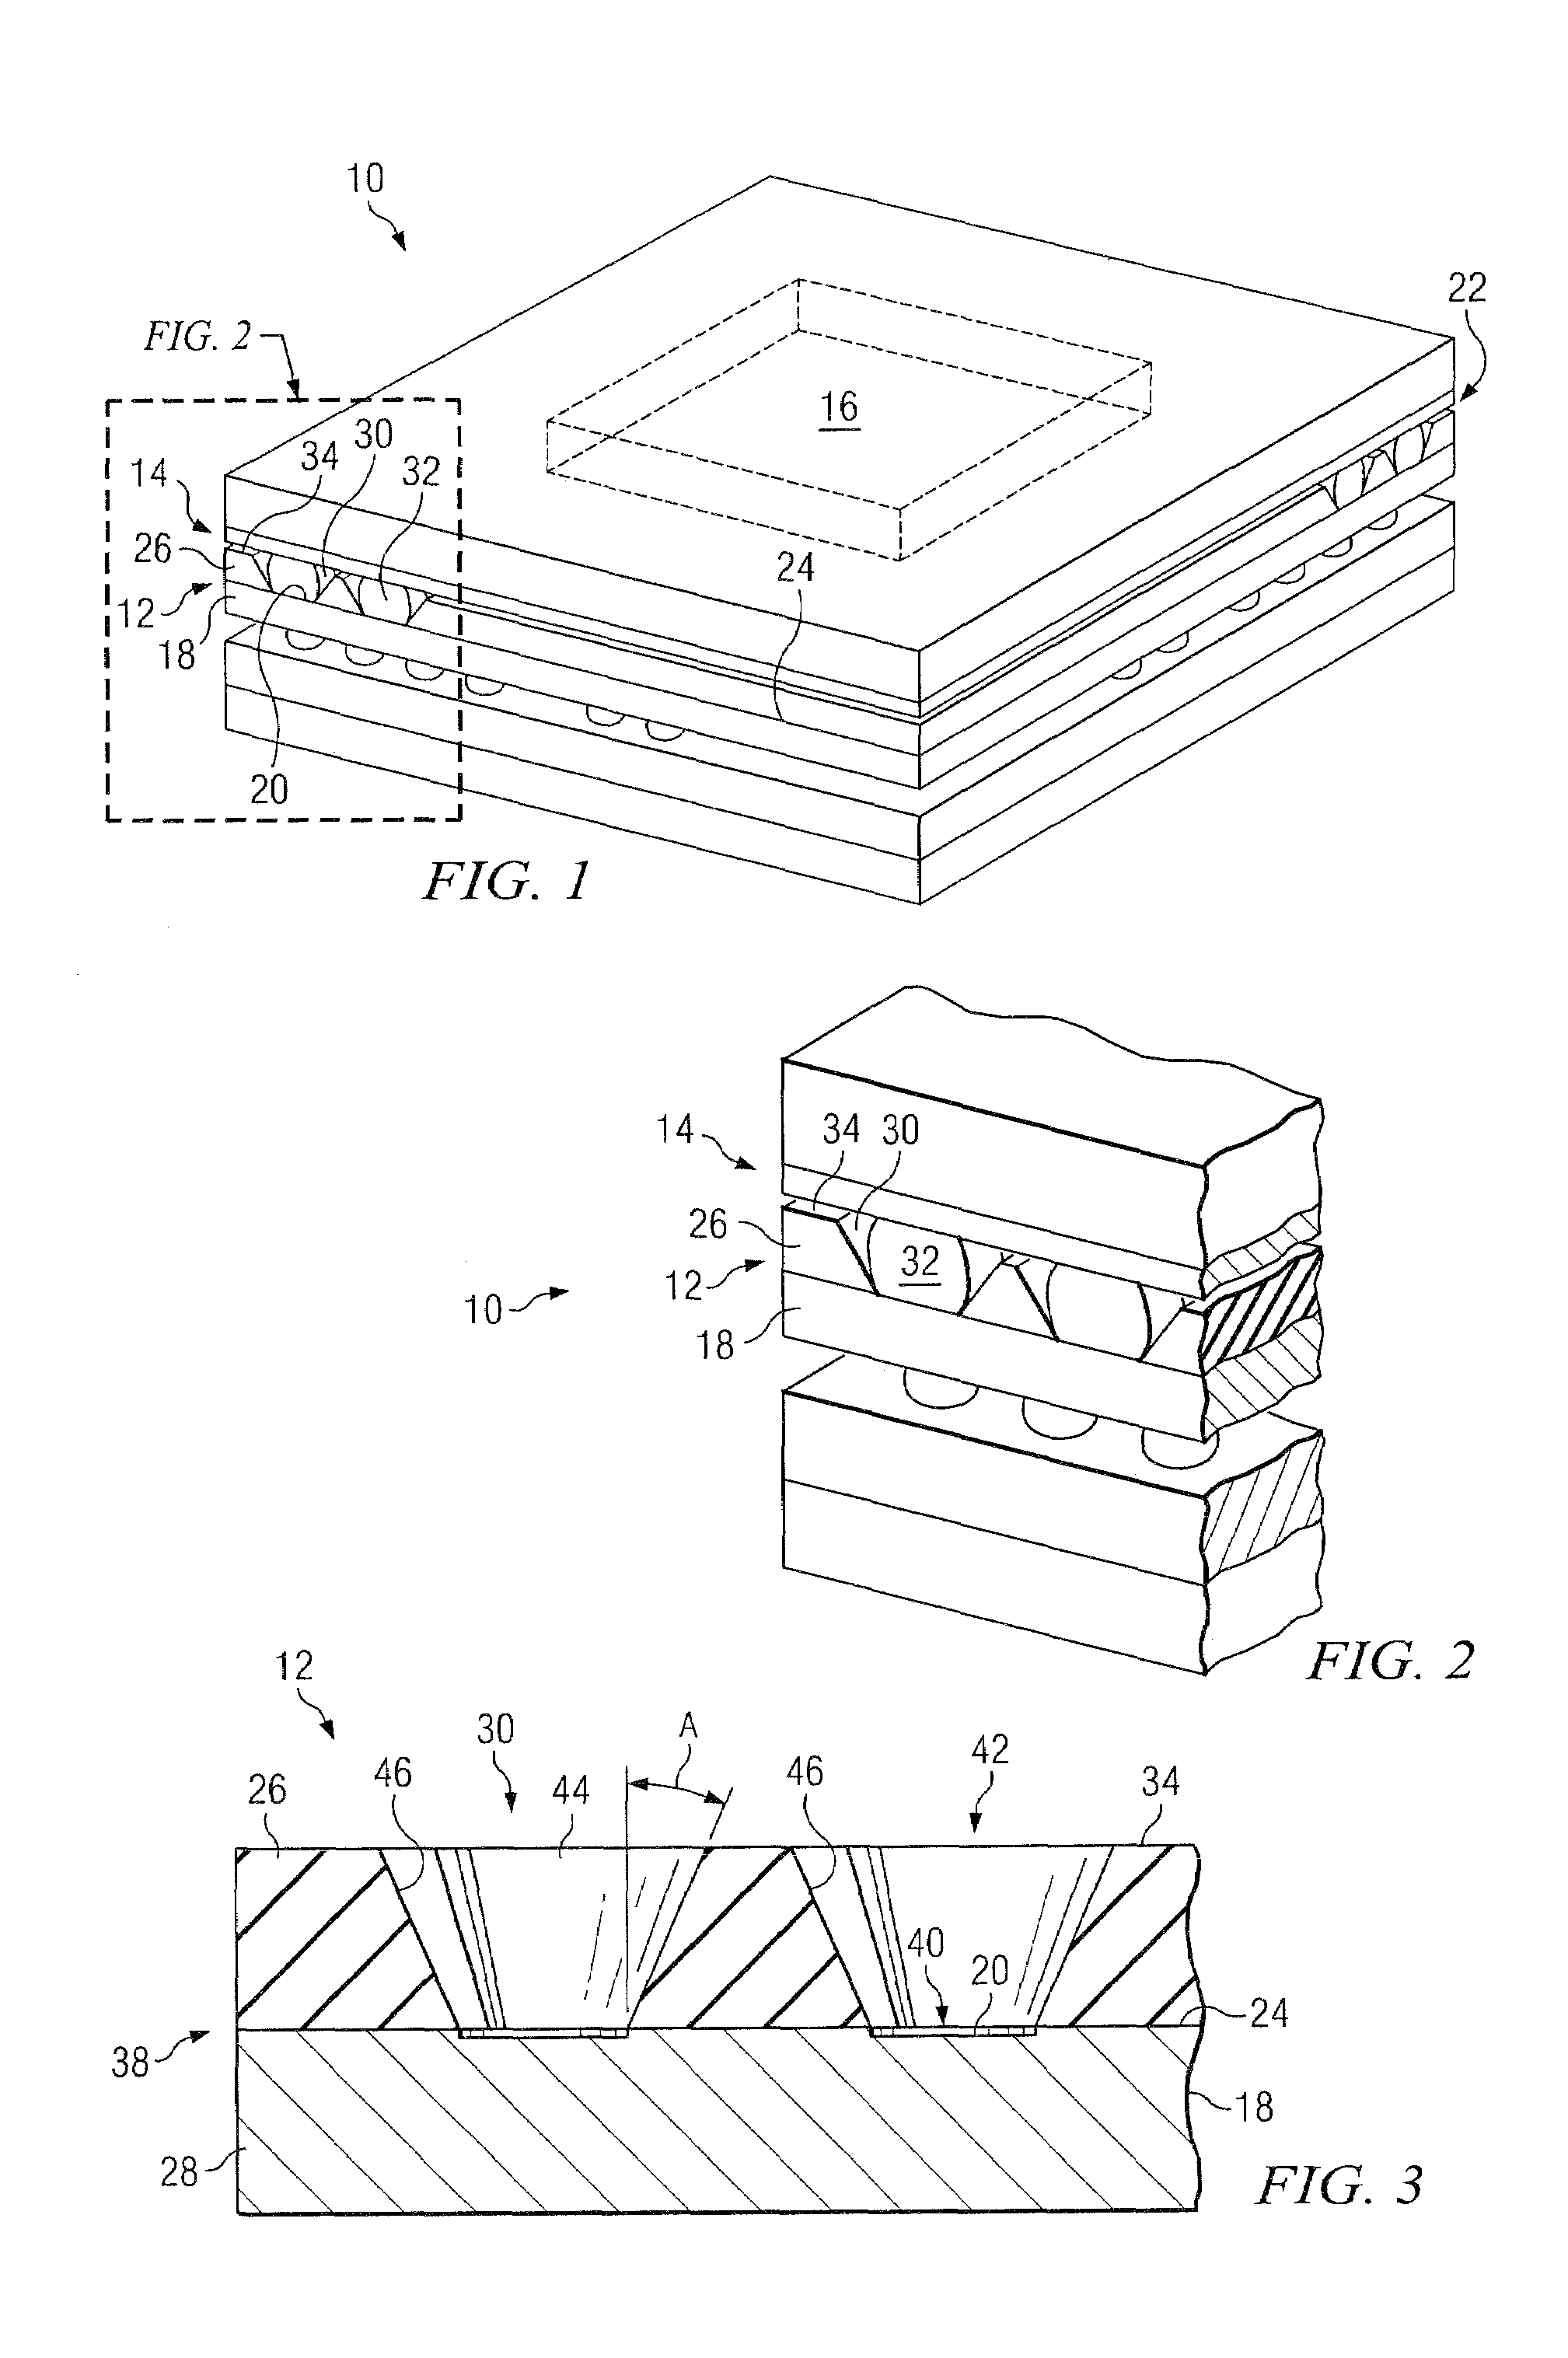 Package-on-package semiconductor assembly